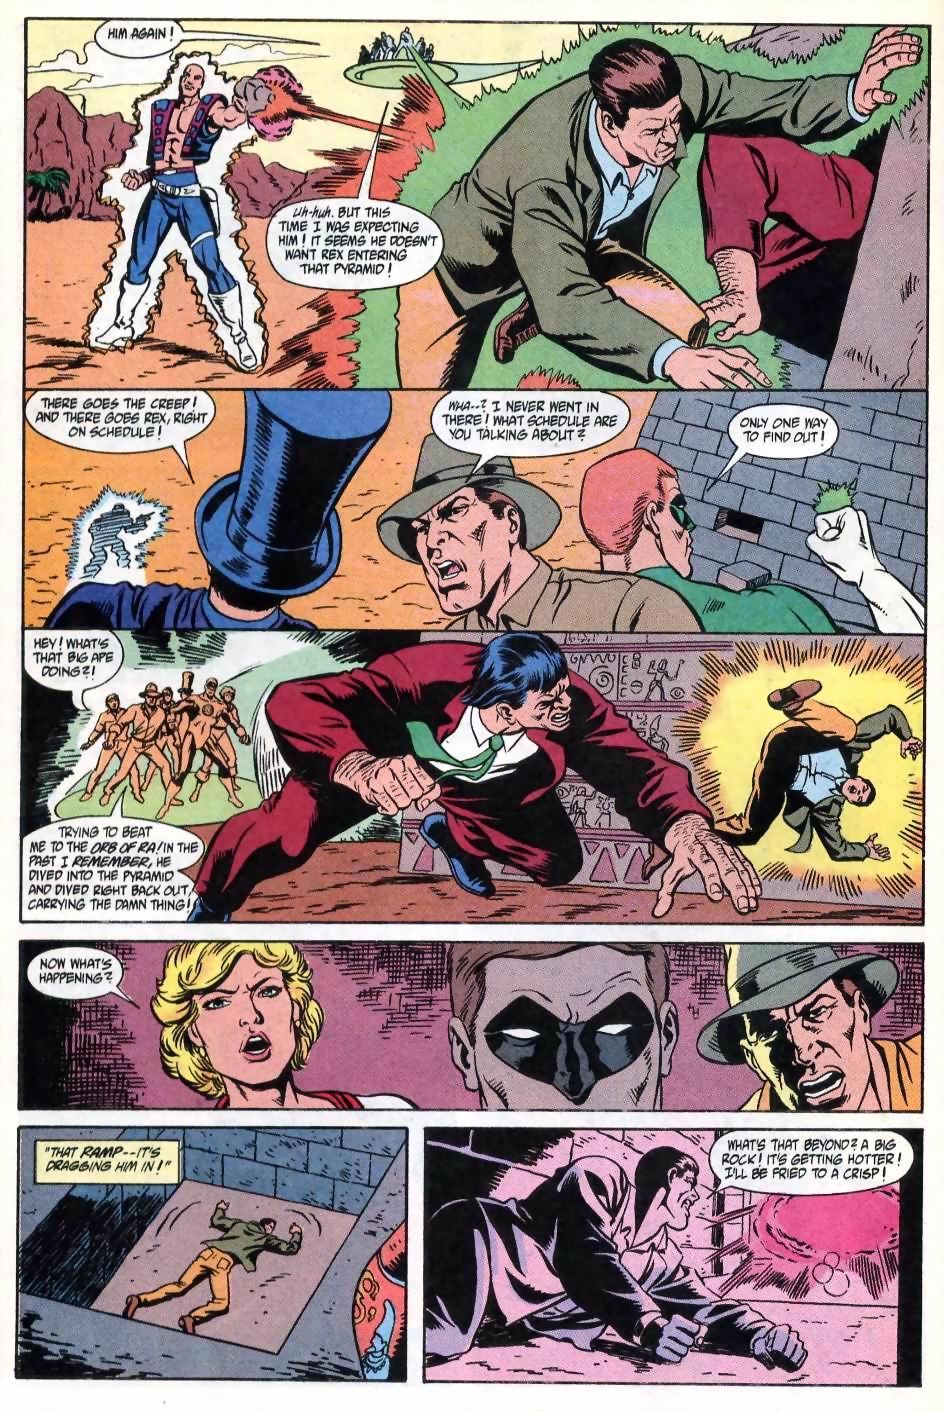 Justice League International (1993) 59 Page 21